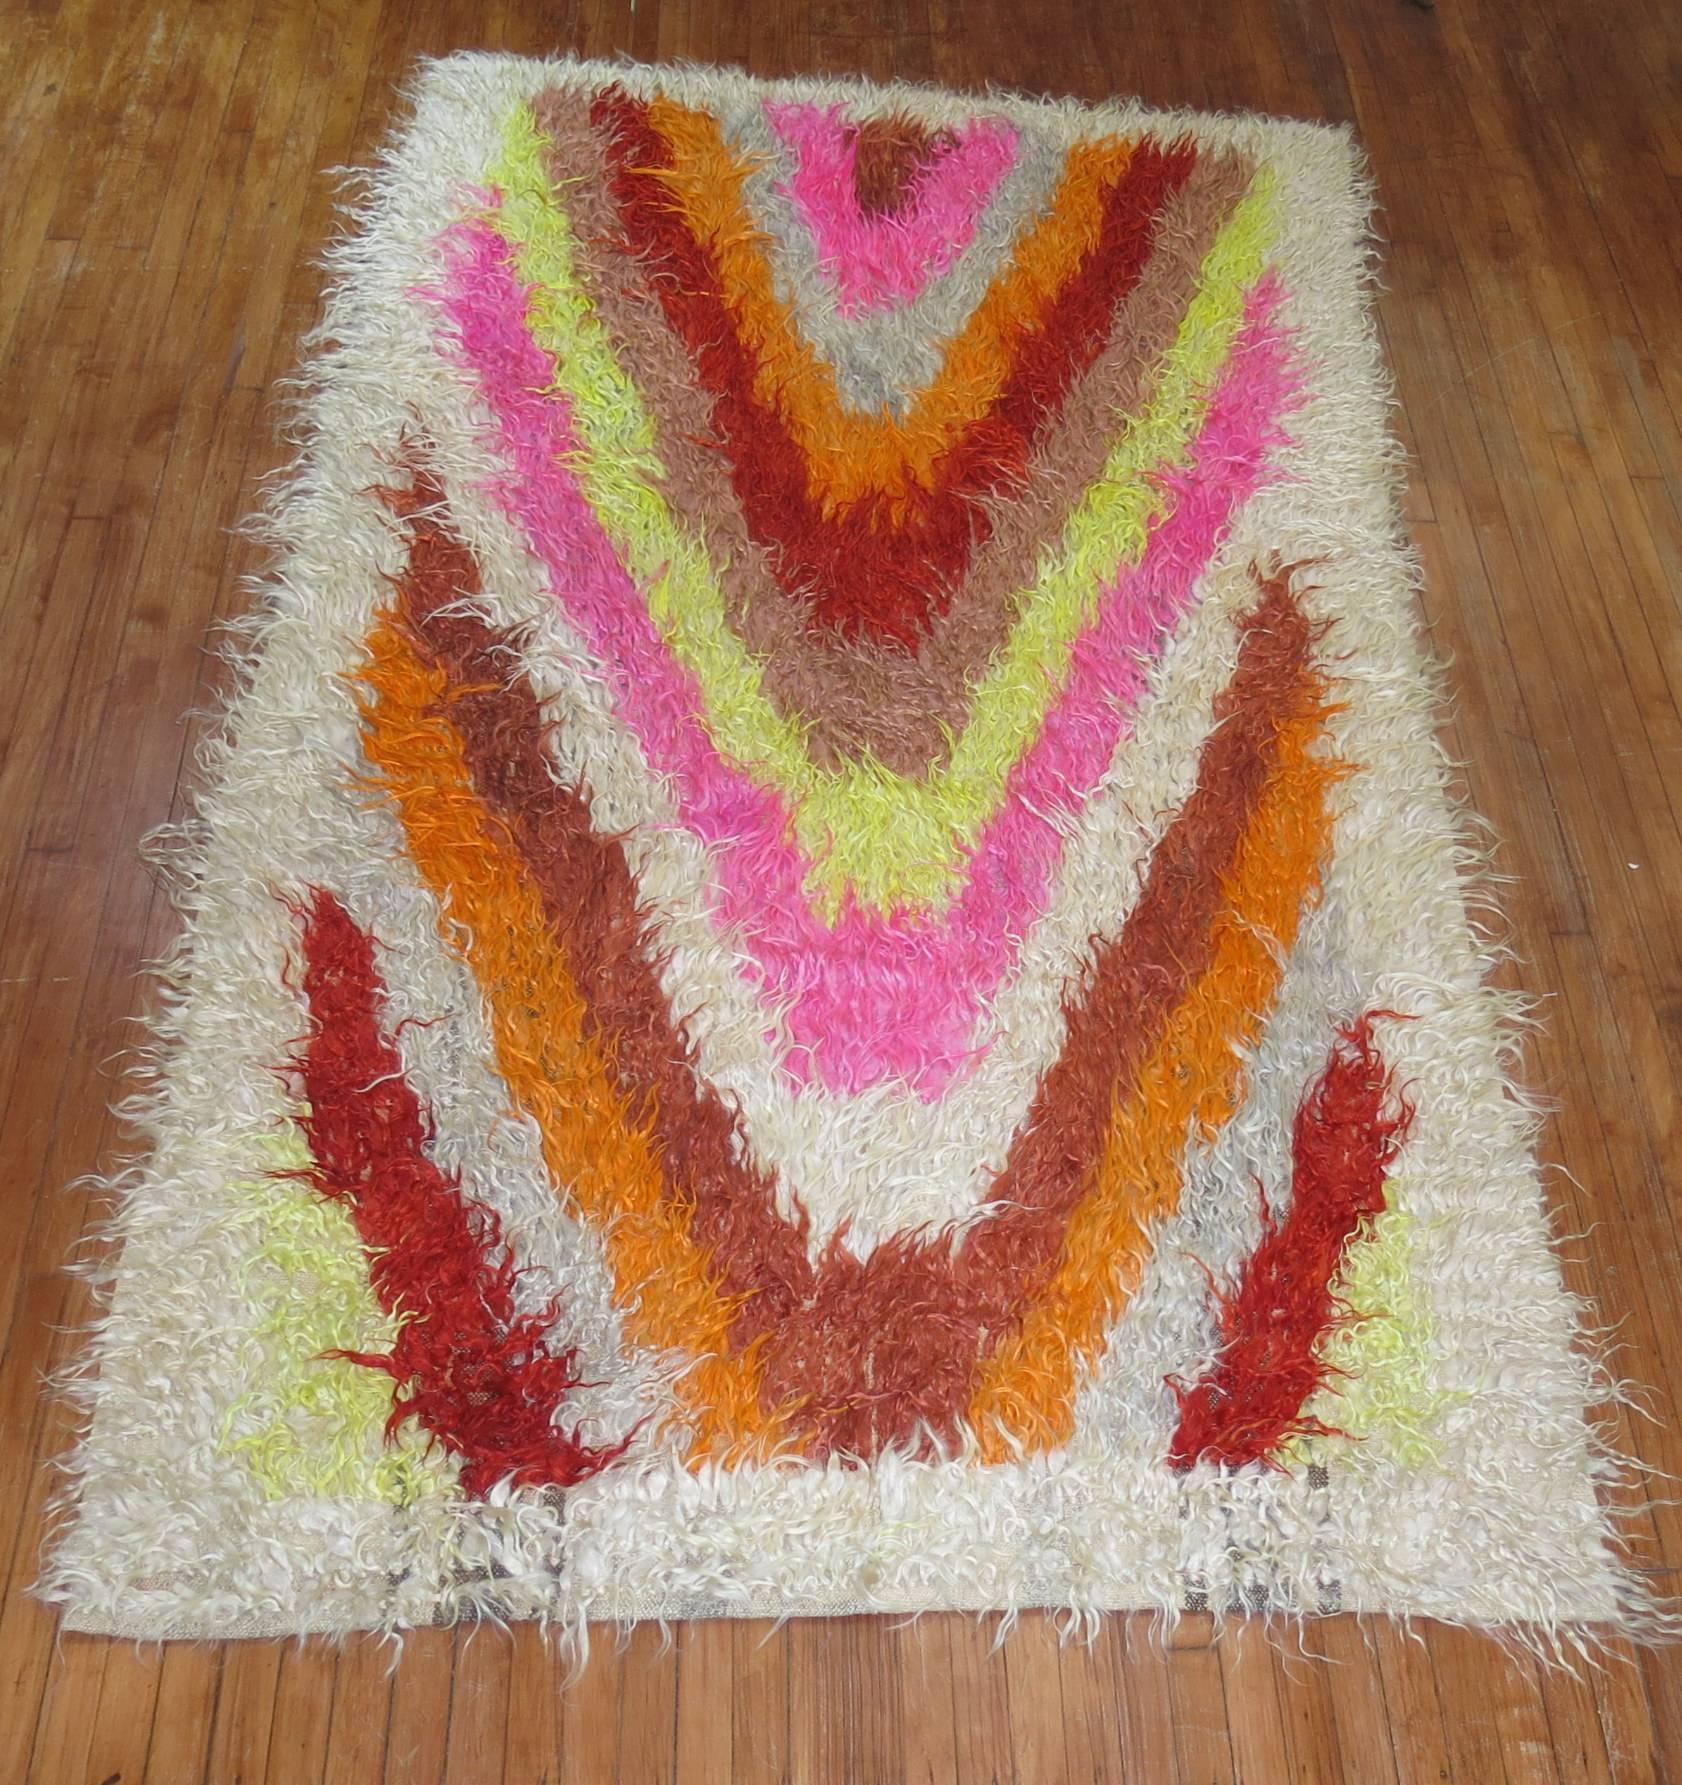 Bright and vibrant area size mid-20th century one of a kind decorative Turkish Tulu Yatak shag rug. Accents in pink, orange, rust, white, beige, red and neon green yellow.